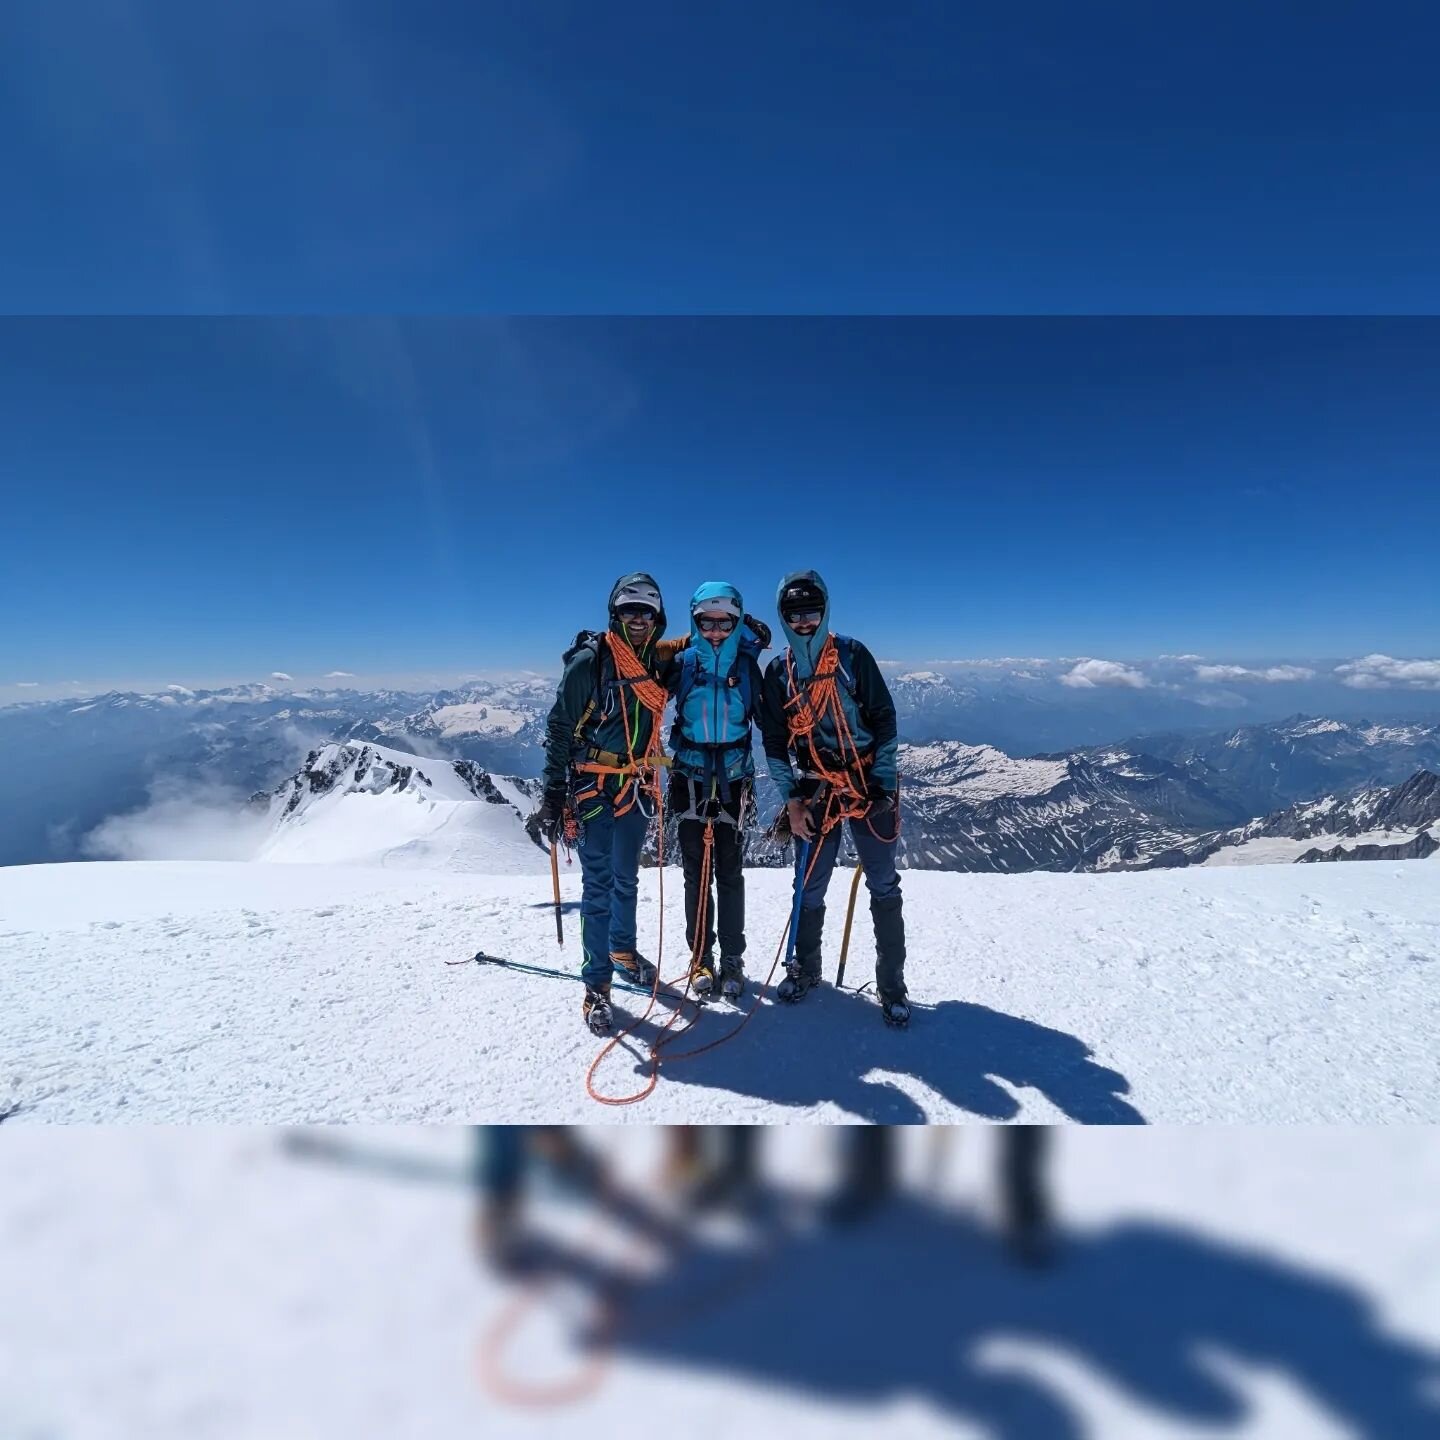 July 2023 |
We made a tour to the top of the Alps.
Preparation for it went with an acclimatization tour to Gran Paradiso (PD-) and Marbr&eacute;es Ridge Traverse(PD+/AD-). Followed by a couple days of relaxation and exploring Chamonix. Even managed t